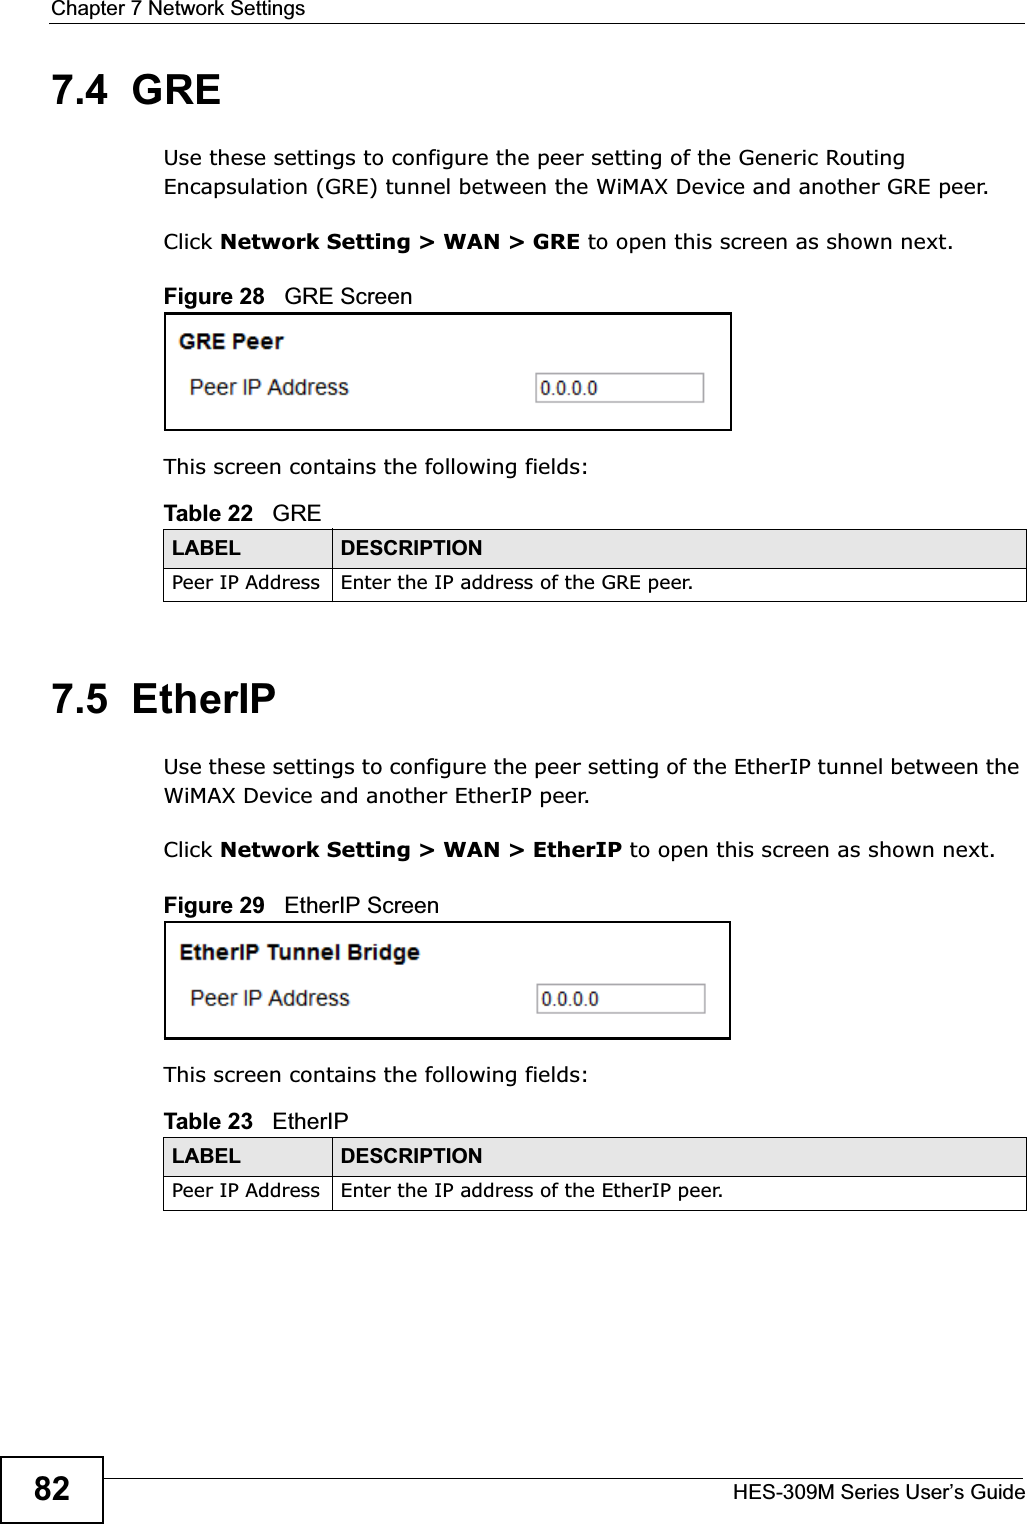 Chapter 7 Network SettingsHES-309M Series User’s Guide827.4  GREUse these settings to configure the peer setting of the Generic Routing Encapsulation (GRE) tunnel between the WiMAX Device and another GRE peer.Click Network Setting &gt; WAN &gt; GRE to open this screen as shown next.Figure 28   GRE ScreenThis screen contains the following fields:7.5  EtherIPUse these settings to configure the peer setting of the EtherIP tunnel between the WiMAX Device and another EtherIP peer.Click Network Setting &gt; WAN &gt; EtherIP to open this screen as shown next.Figure 29   EtherIP ScreenThis screen contains the following fields:Table 22   GRELABEL DESCRIPTIONPeer IP Address Enter the IP address of the GRE peer.Table 23   EtherIPLABEL DESCRIPTIONPeer IP Address Enter the IP address of the EtherIP peer.